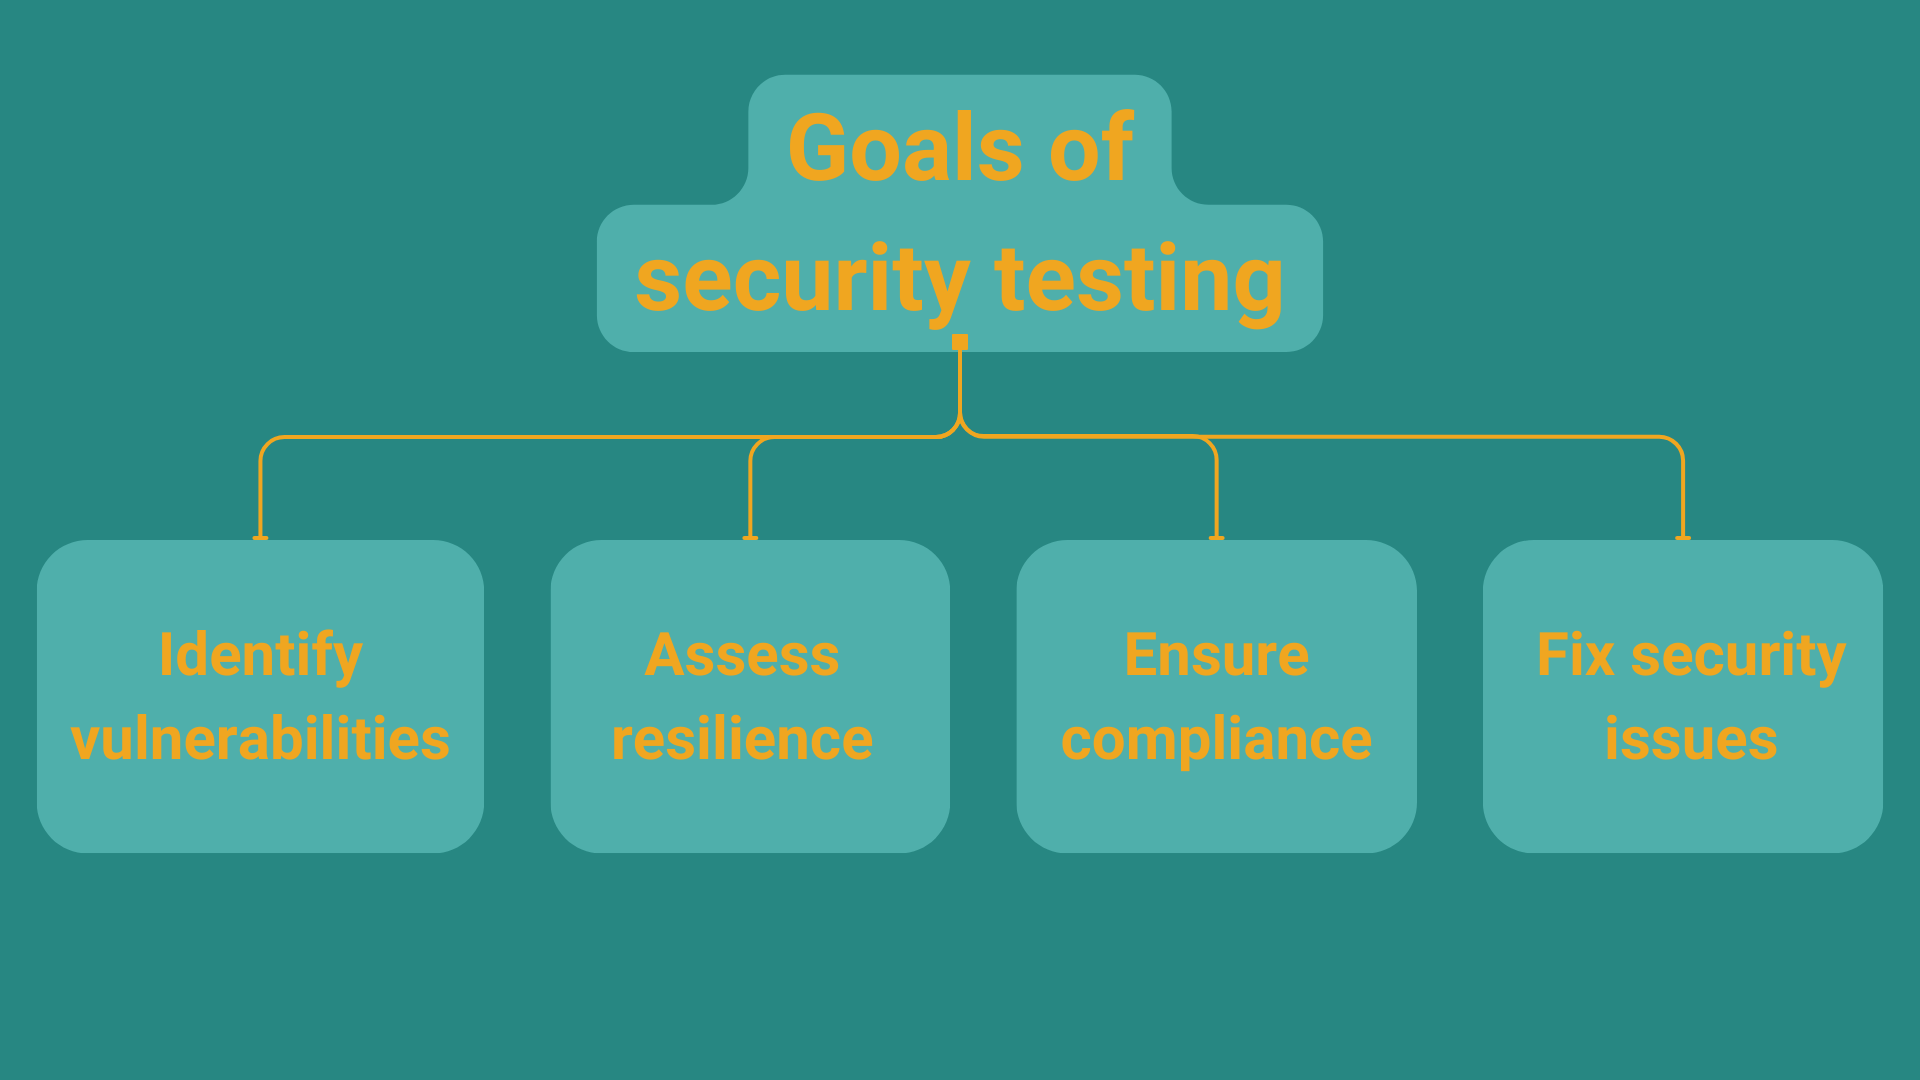 The main goals of security testing